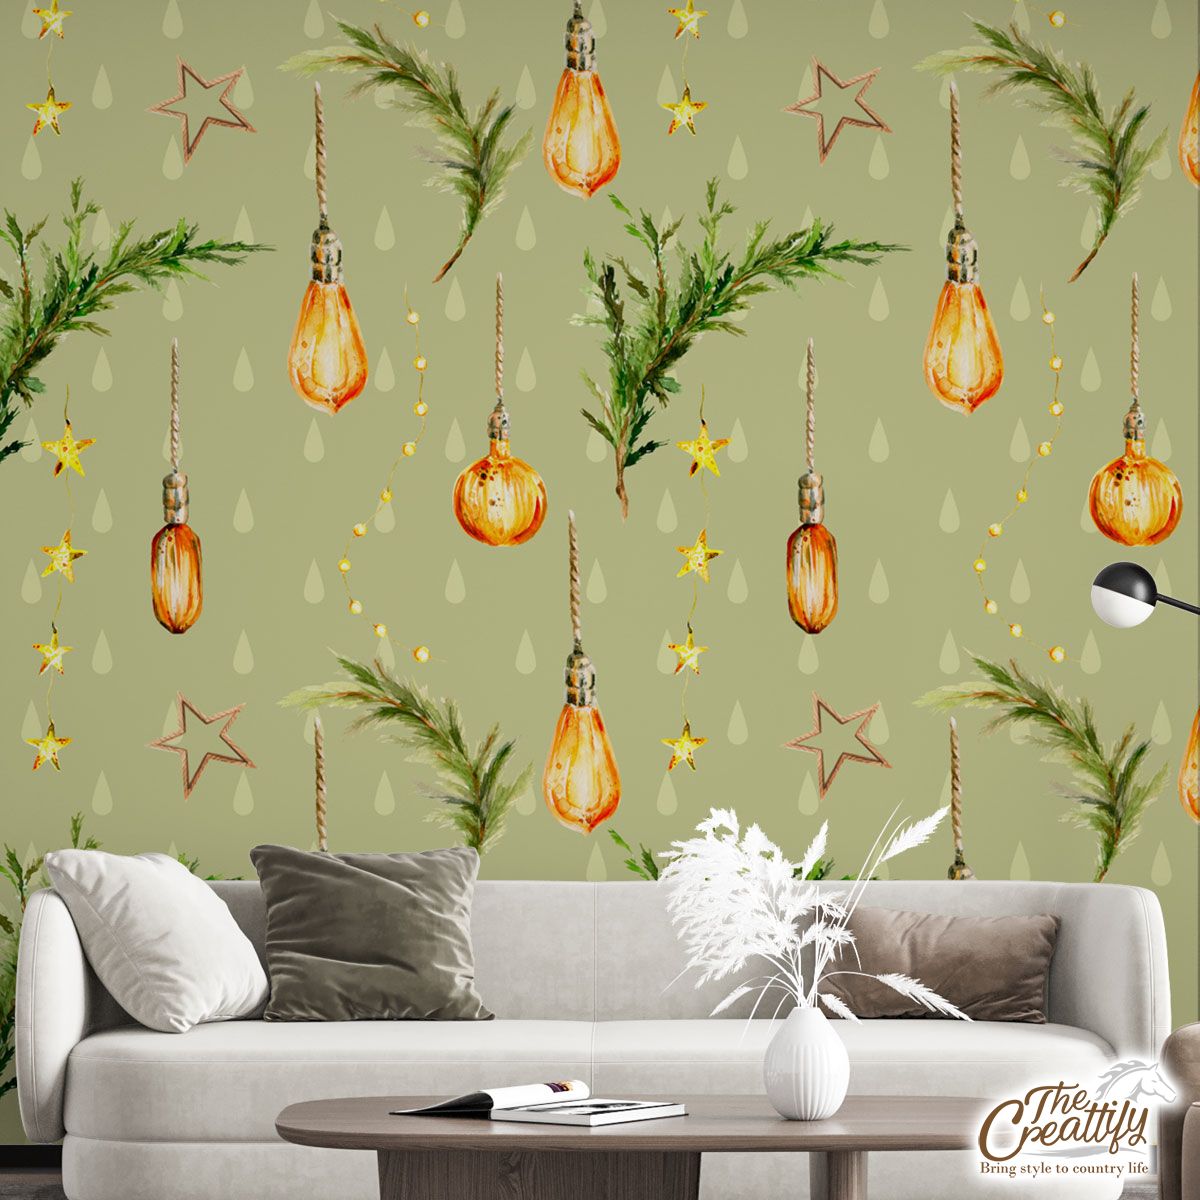 Christmas Lights With Pine Tree Pattern Wall Mural